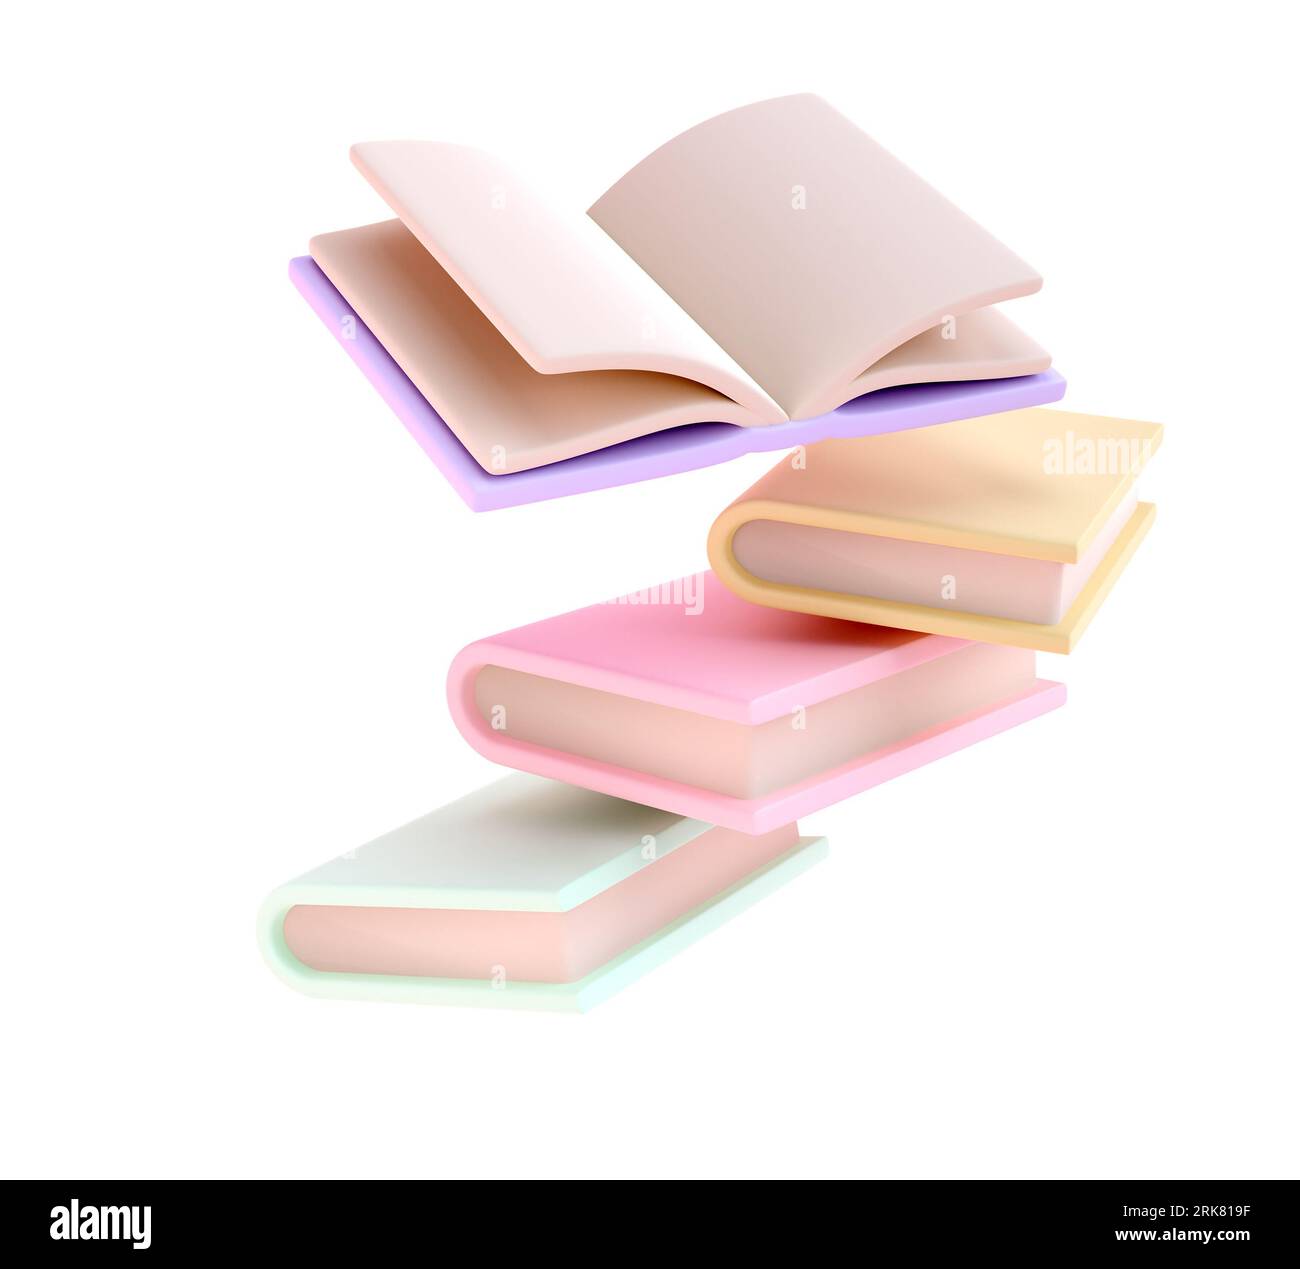 Open Book White Transparent, Open Book Books, Open Books, Books, And Read  Textbooks PNG Image For Free Download